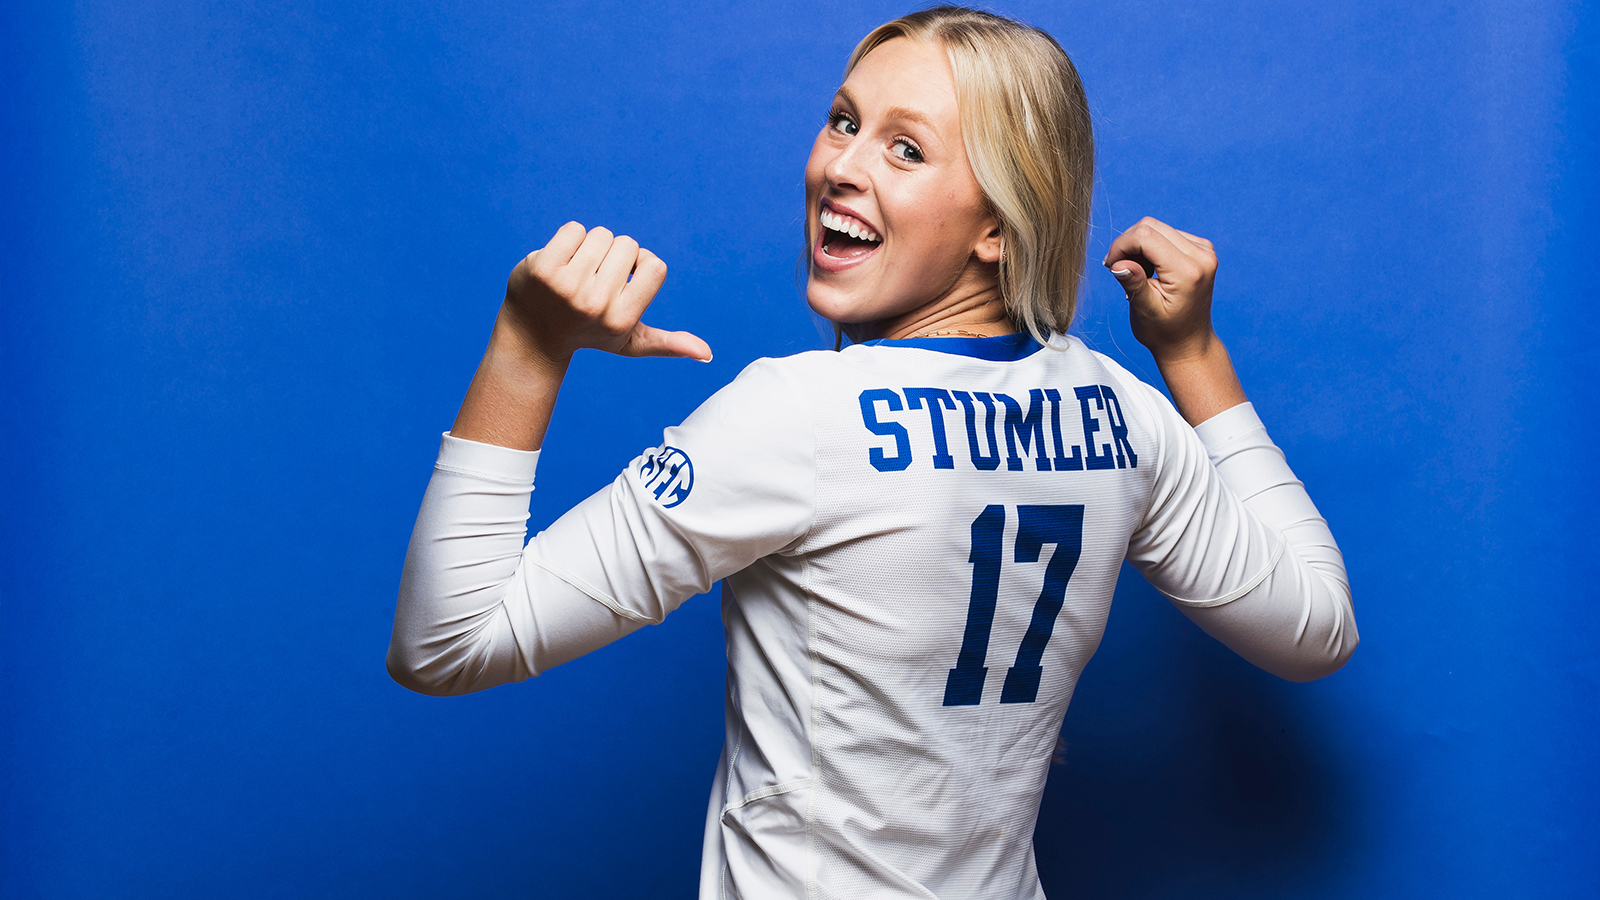 Alli Stumler’s Double Double Starts UK’s SEC Play Off With Sweep